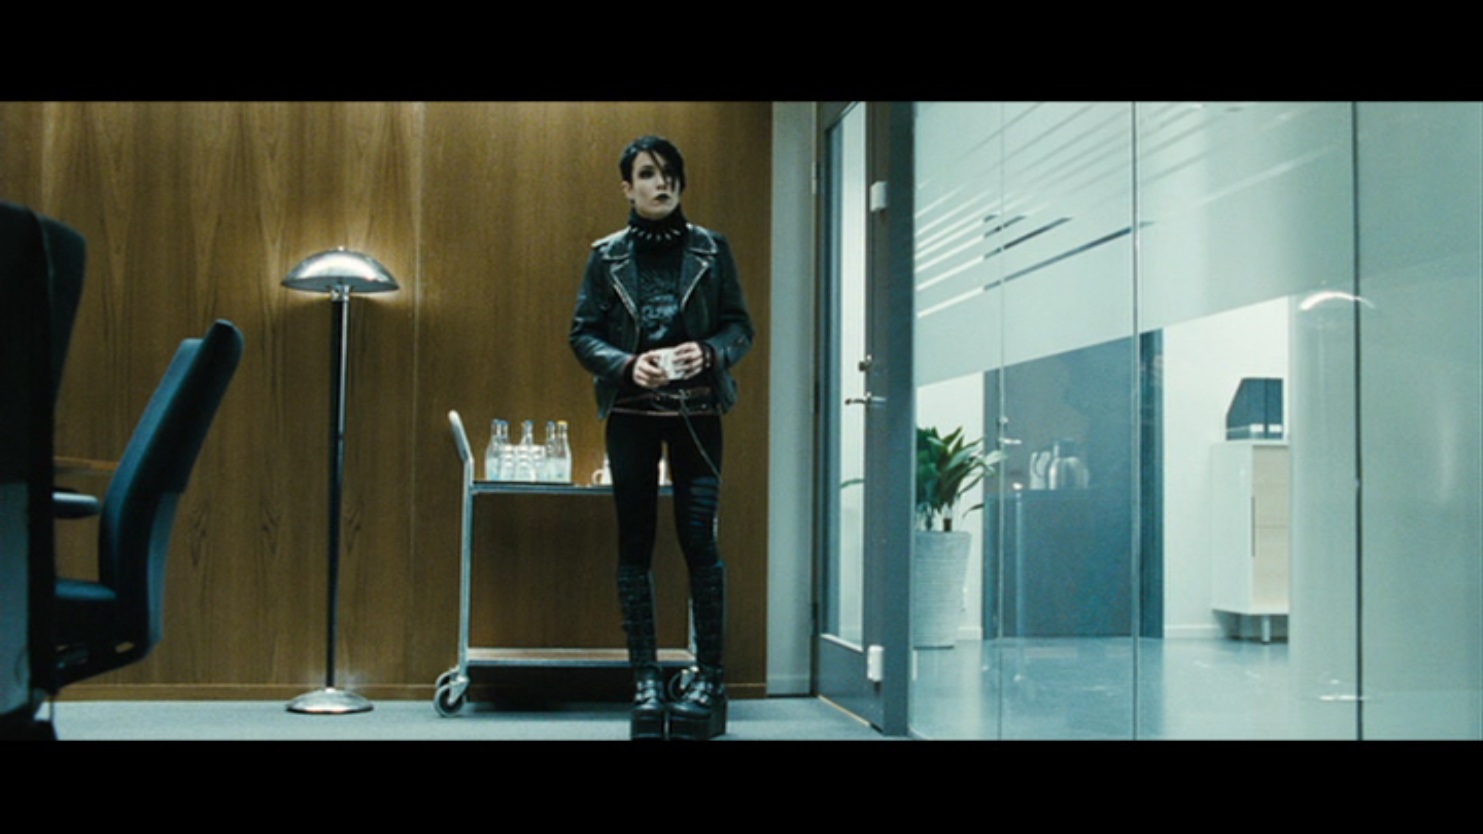 Happyotter: THE GIRL WITH THE DRAGON TATTOO (2009)